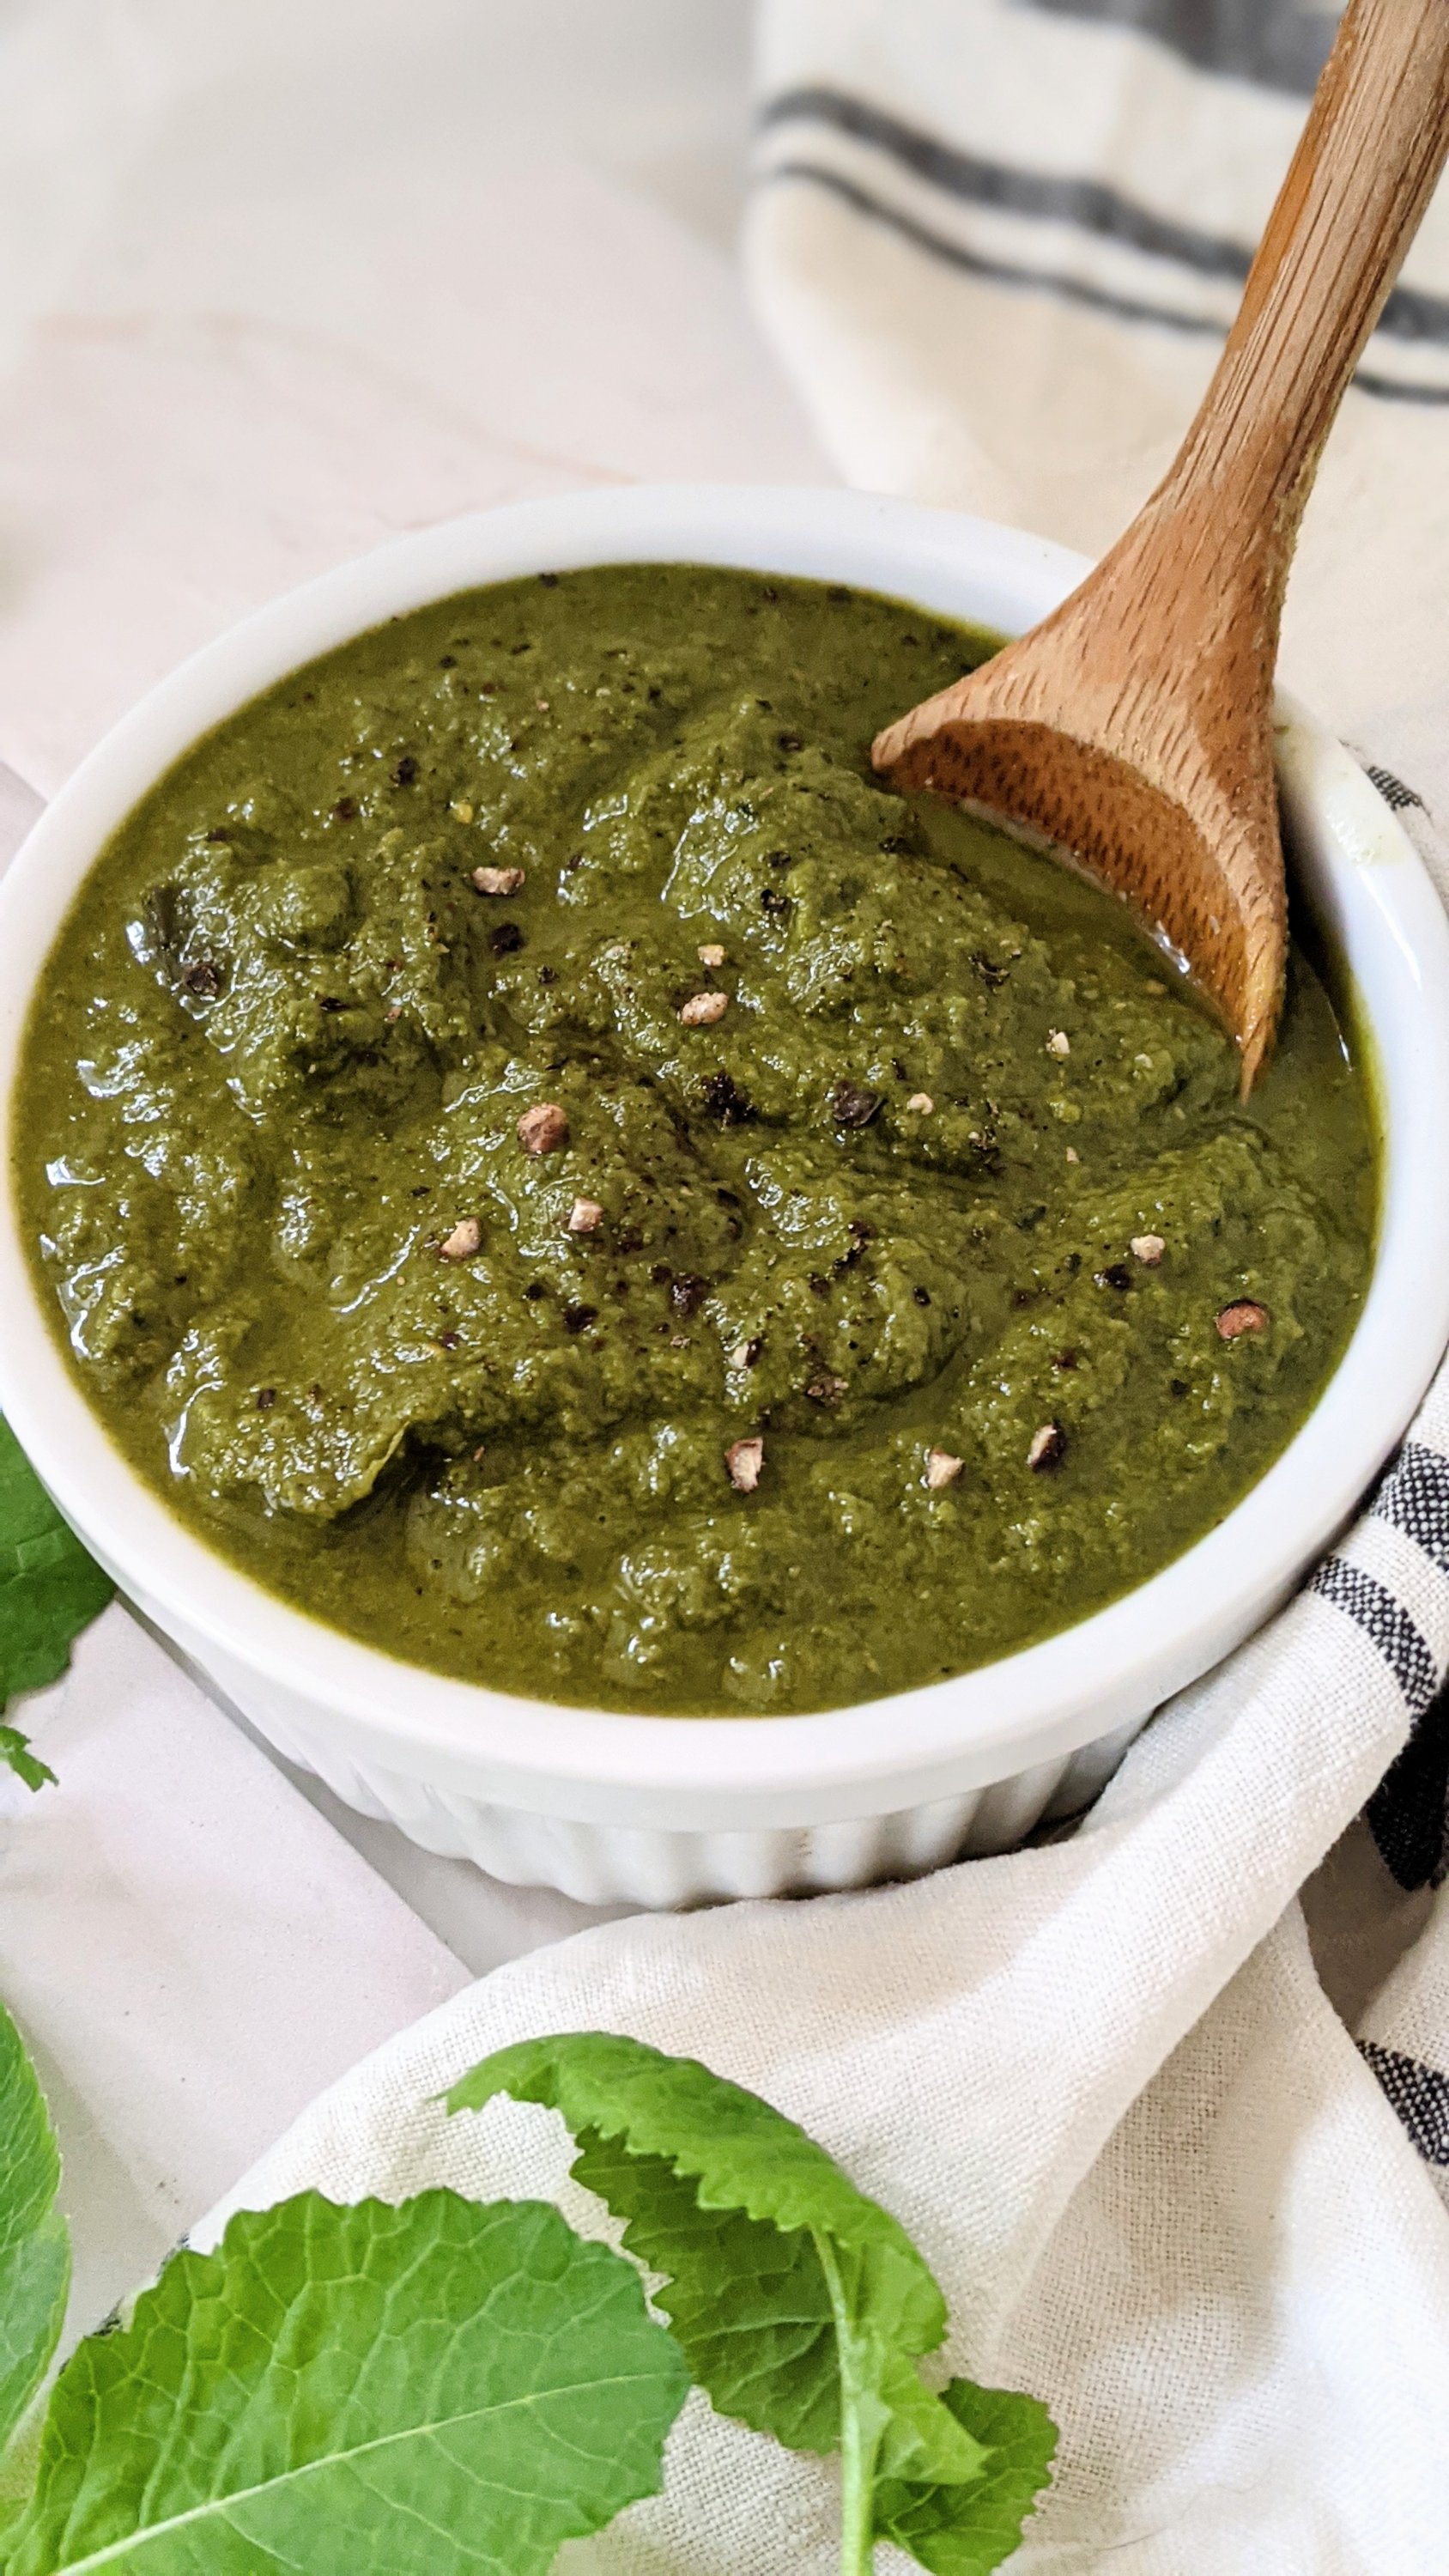 beet top pesto recipe can i eat beet greens recipes for beet greens what to do with beet tops